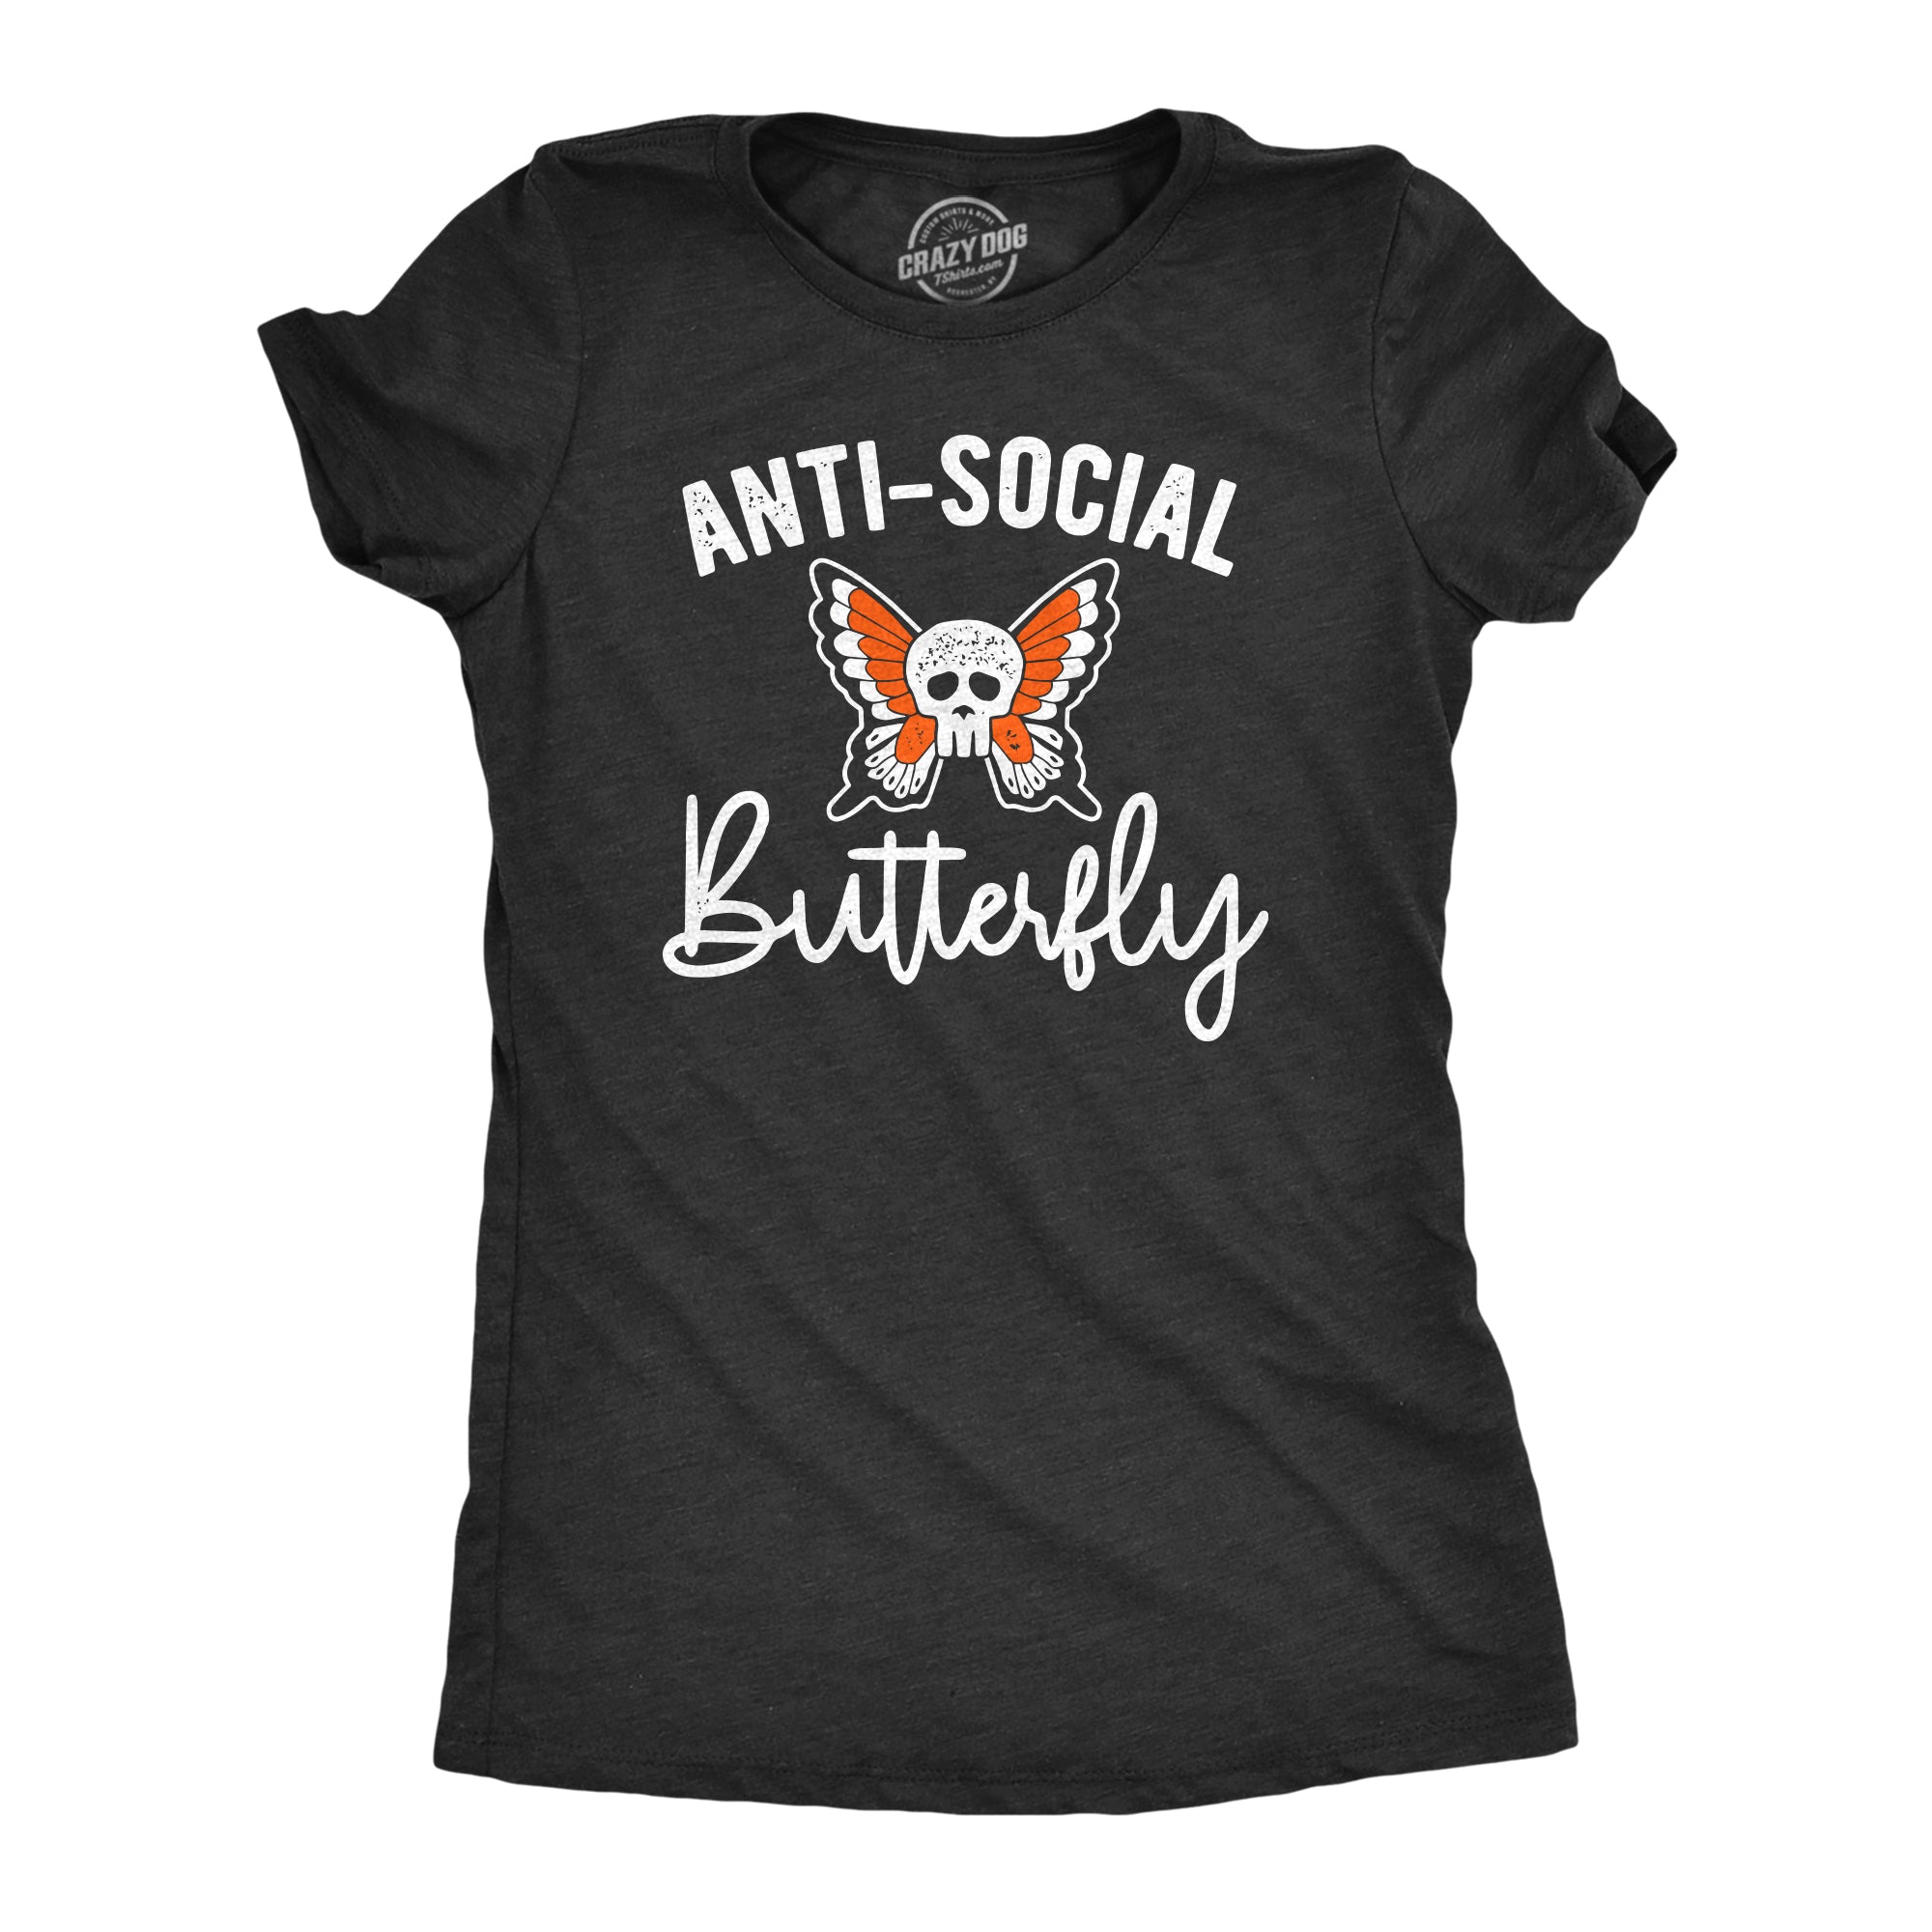 Funny Heather Black - Tan Text Anti-Social Butterfly Womens T Shirt Nerdy Introvert Animal Tee